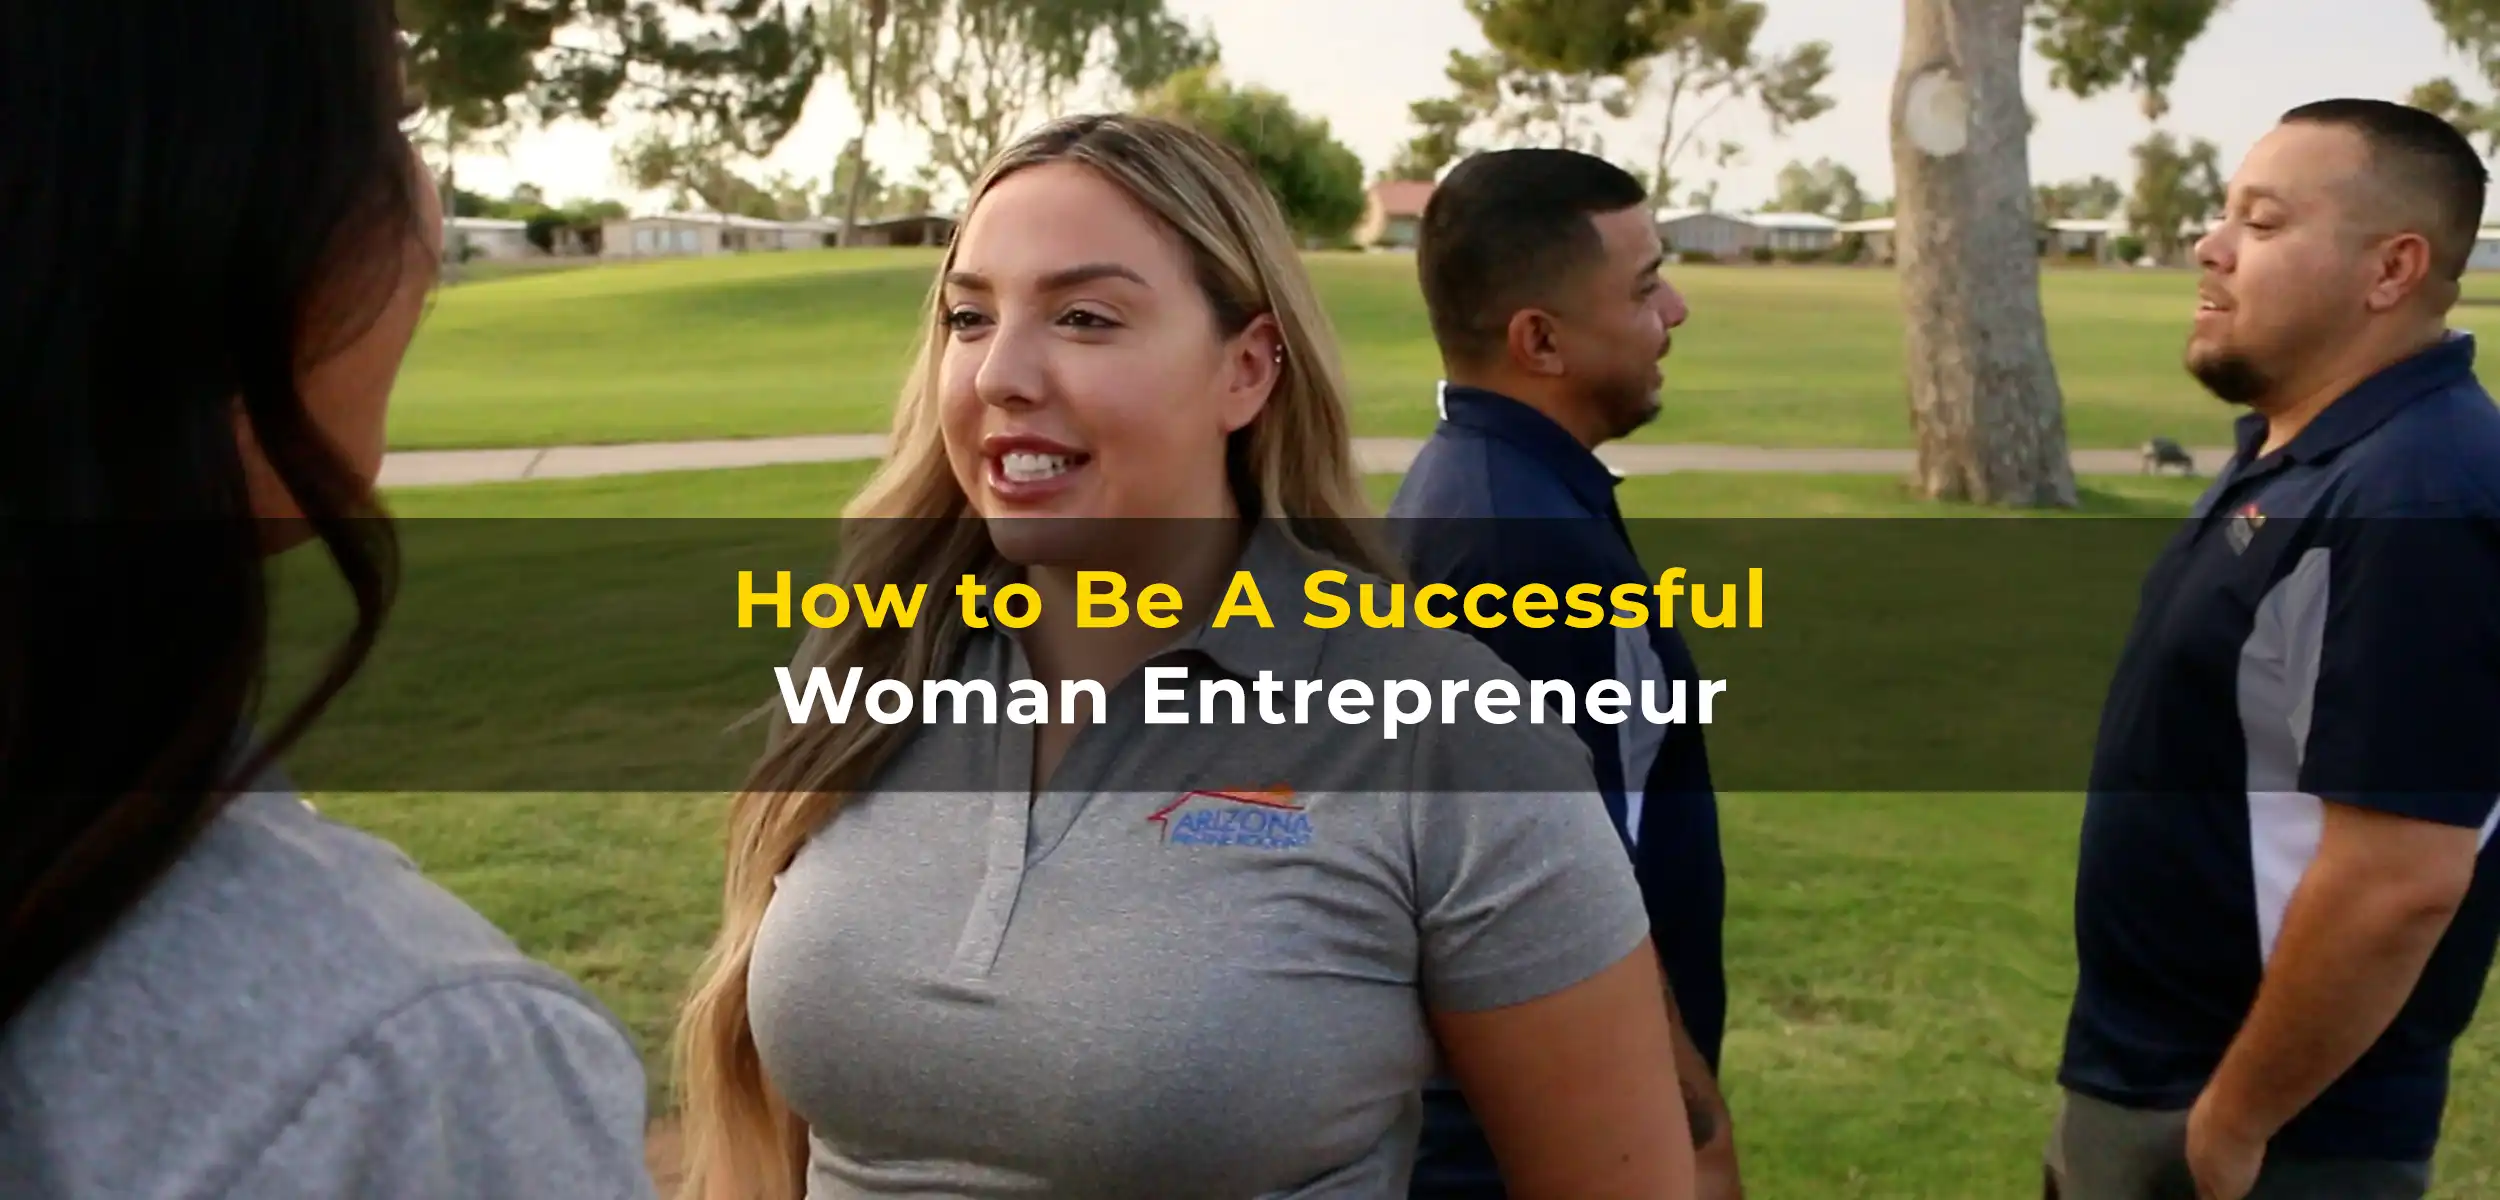 How to Be a Successful Woman Entrepreneur